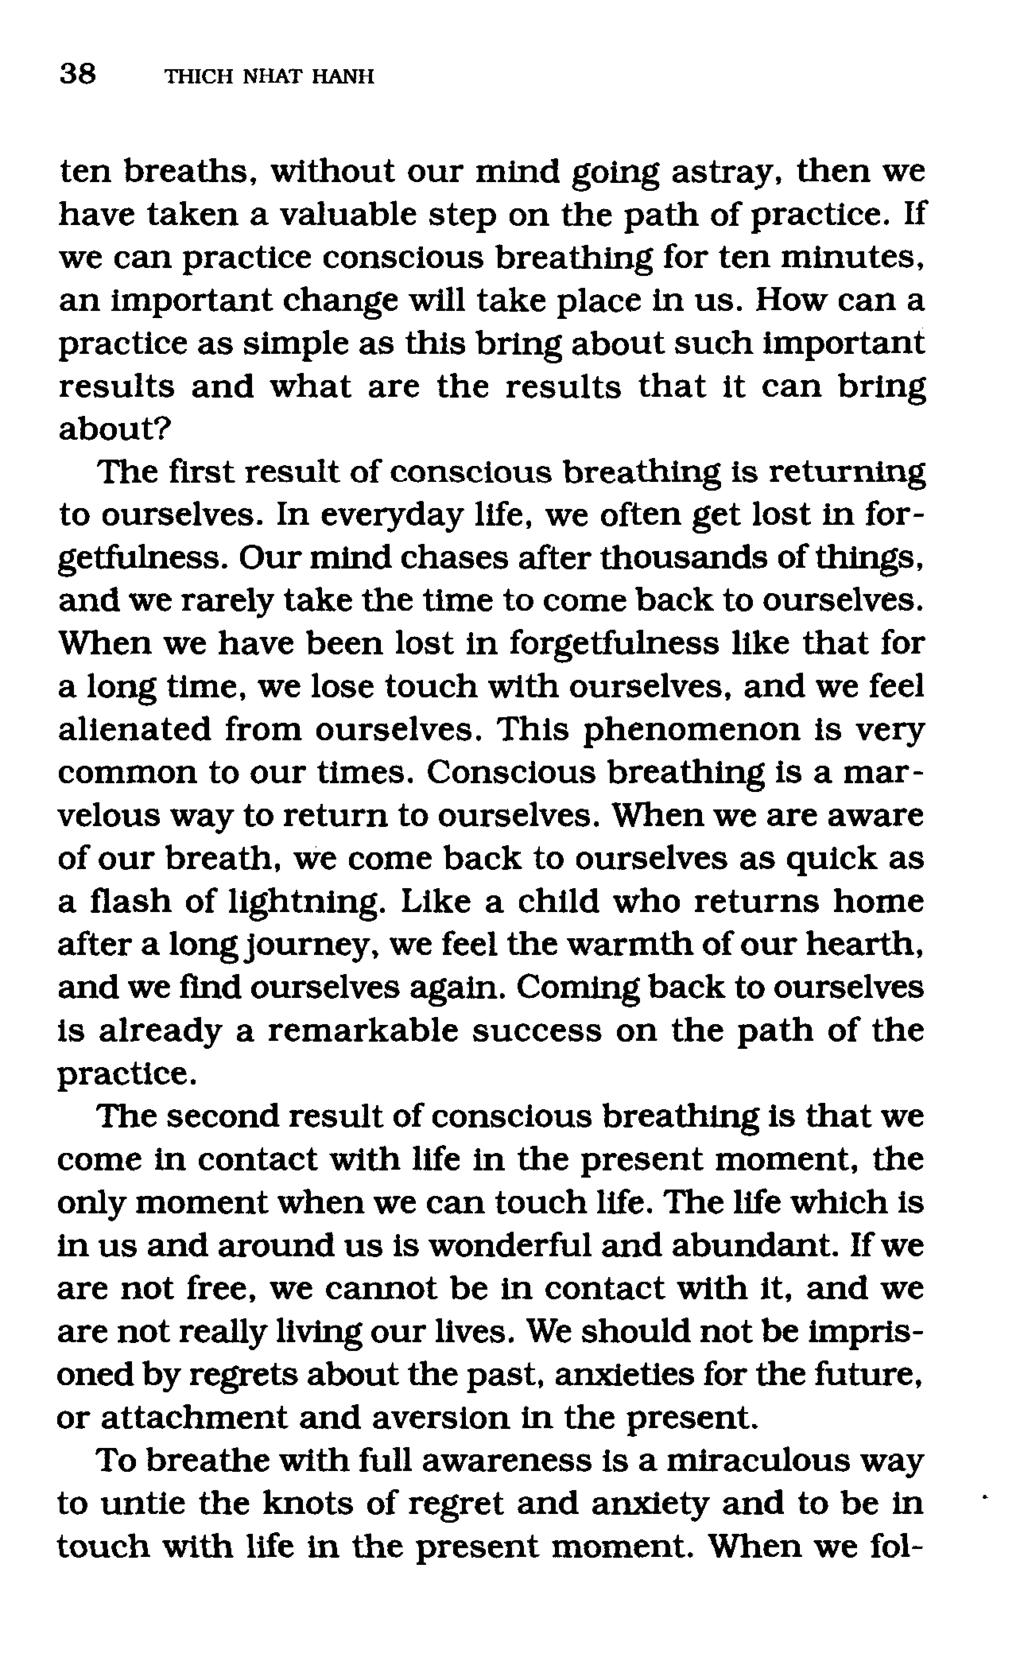 ten breaths, without our mind going astray, then we have taken a valuable step on the path of practice.